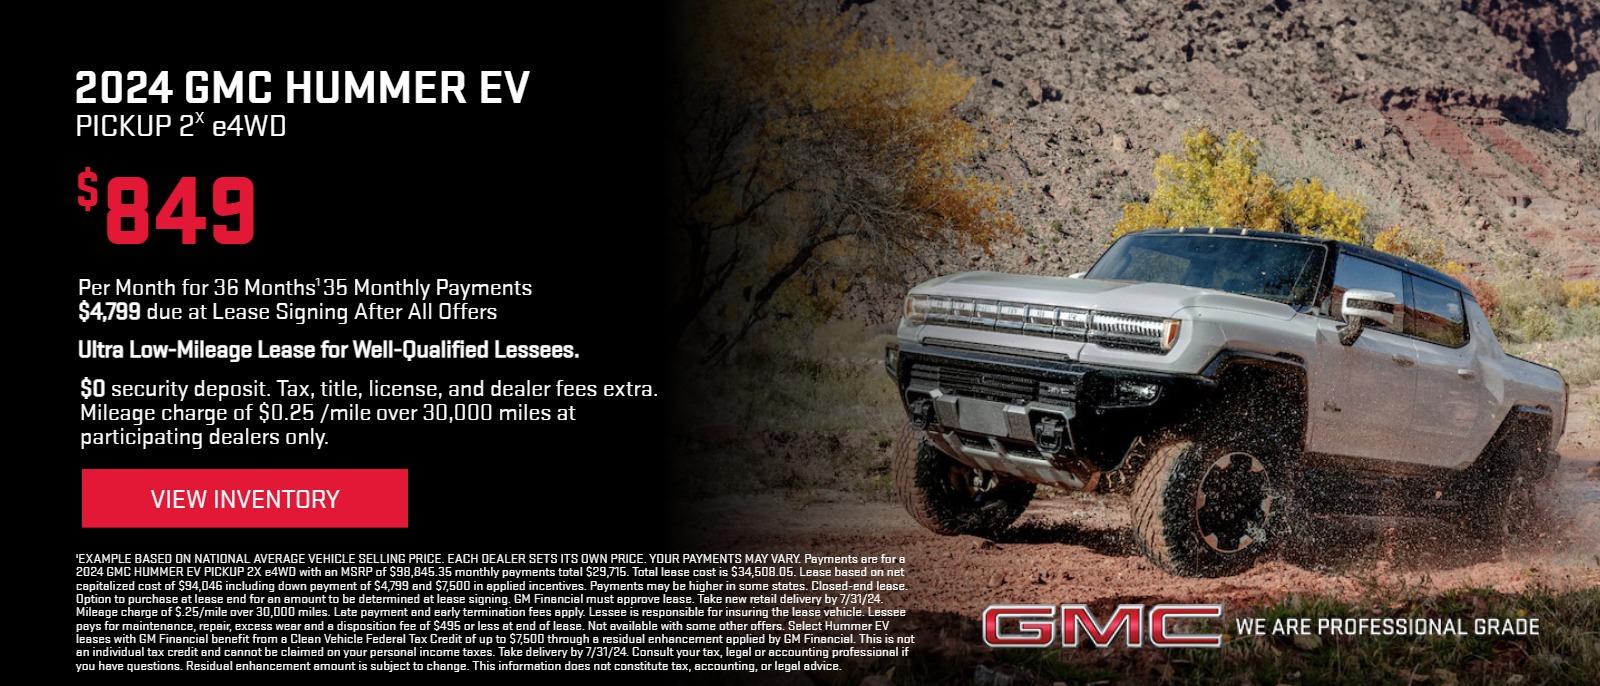 2024 GMC HUMMER EV PICKUP E4WD 2X
Ultra Low-Mileage Lease for Well-Qualified Lessees.
$849/MONTH
for 36 months.

$4,799 due at signing (after all offers).